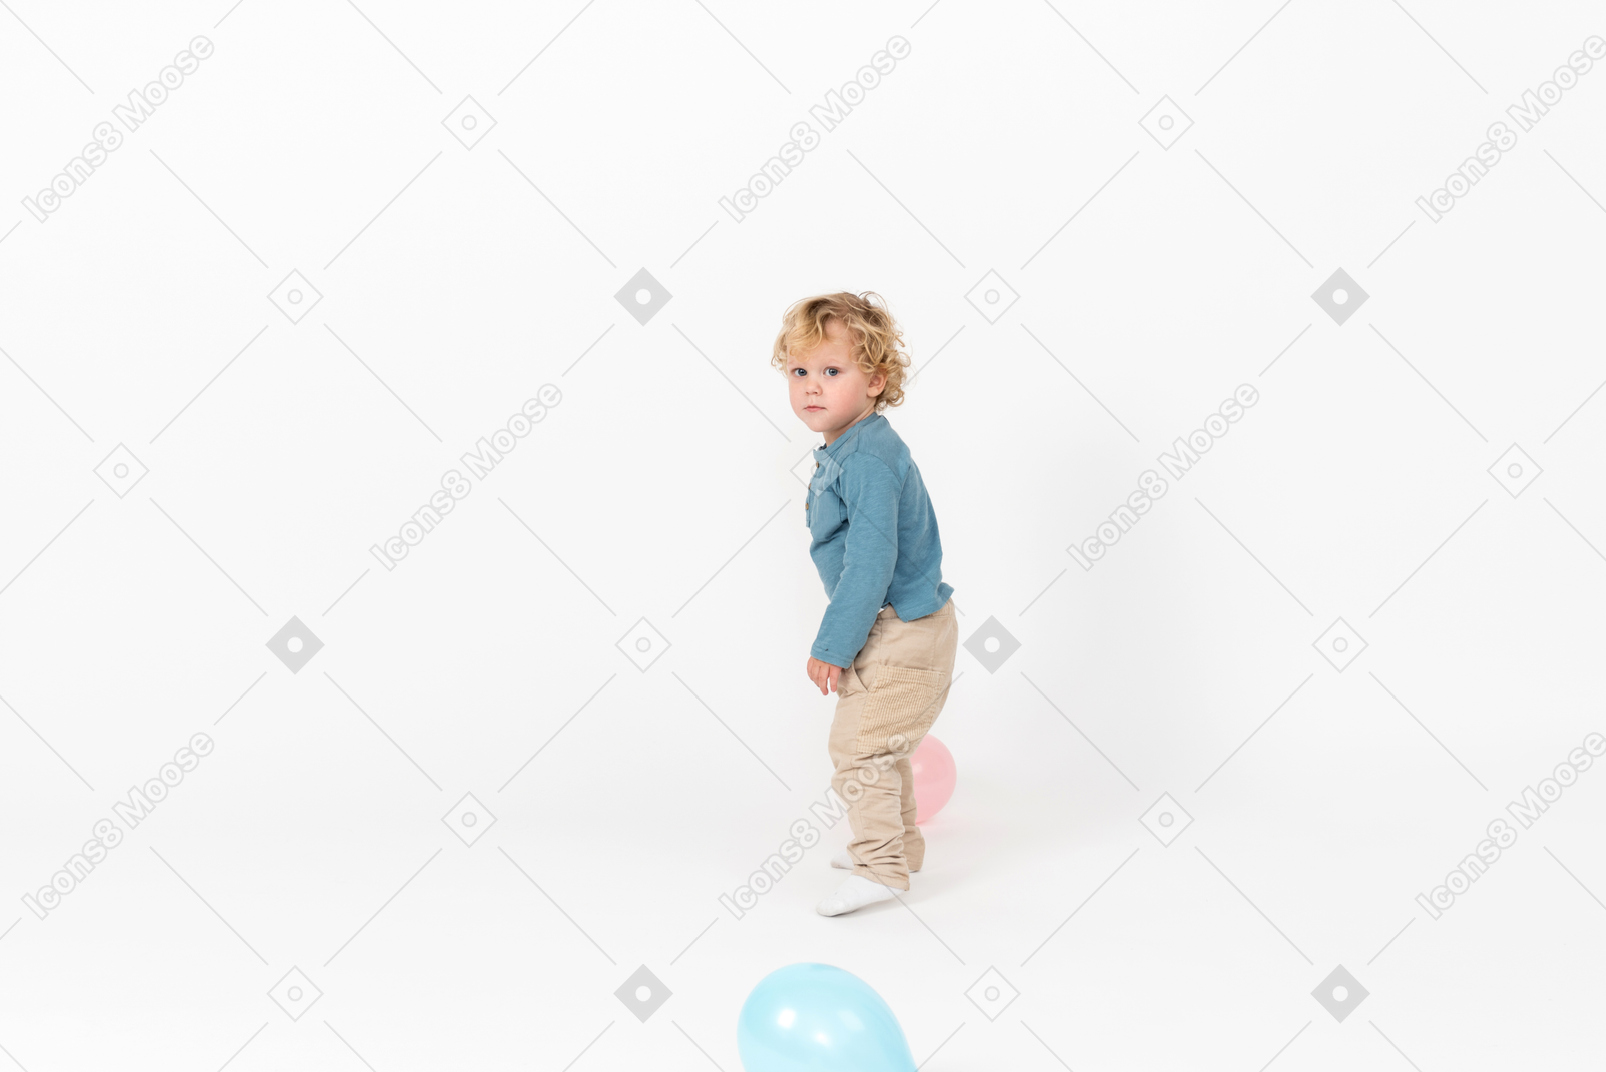 Baby boy standing among balloons and looking into camera